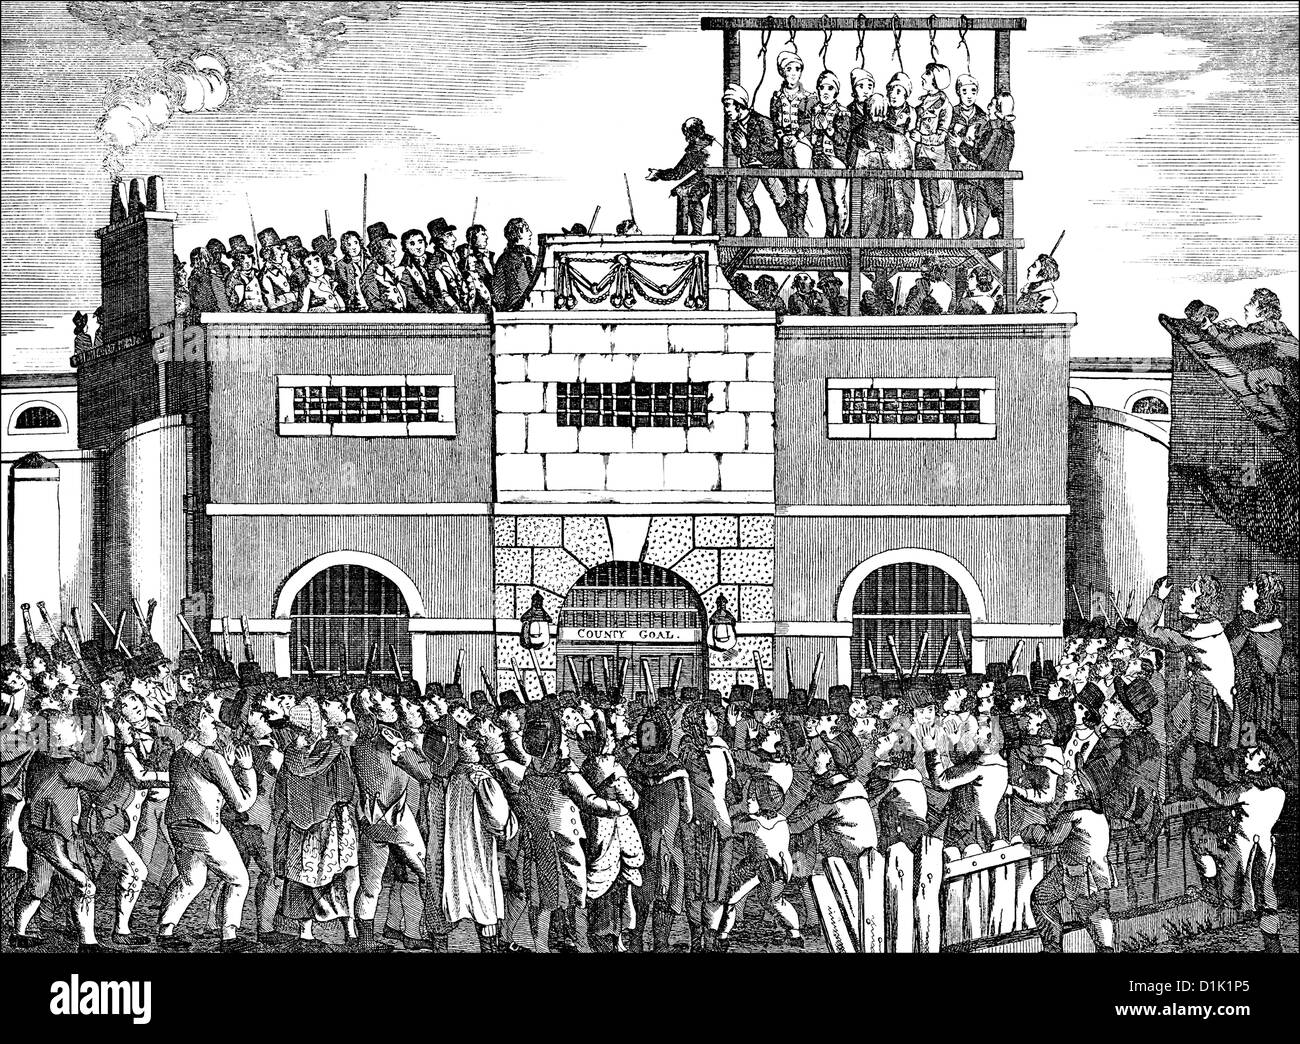 public execution by hanging at the end of the 18th century in England, Stock Photo